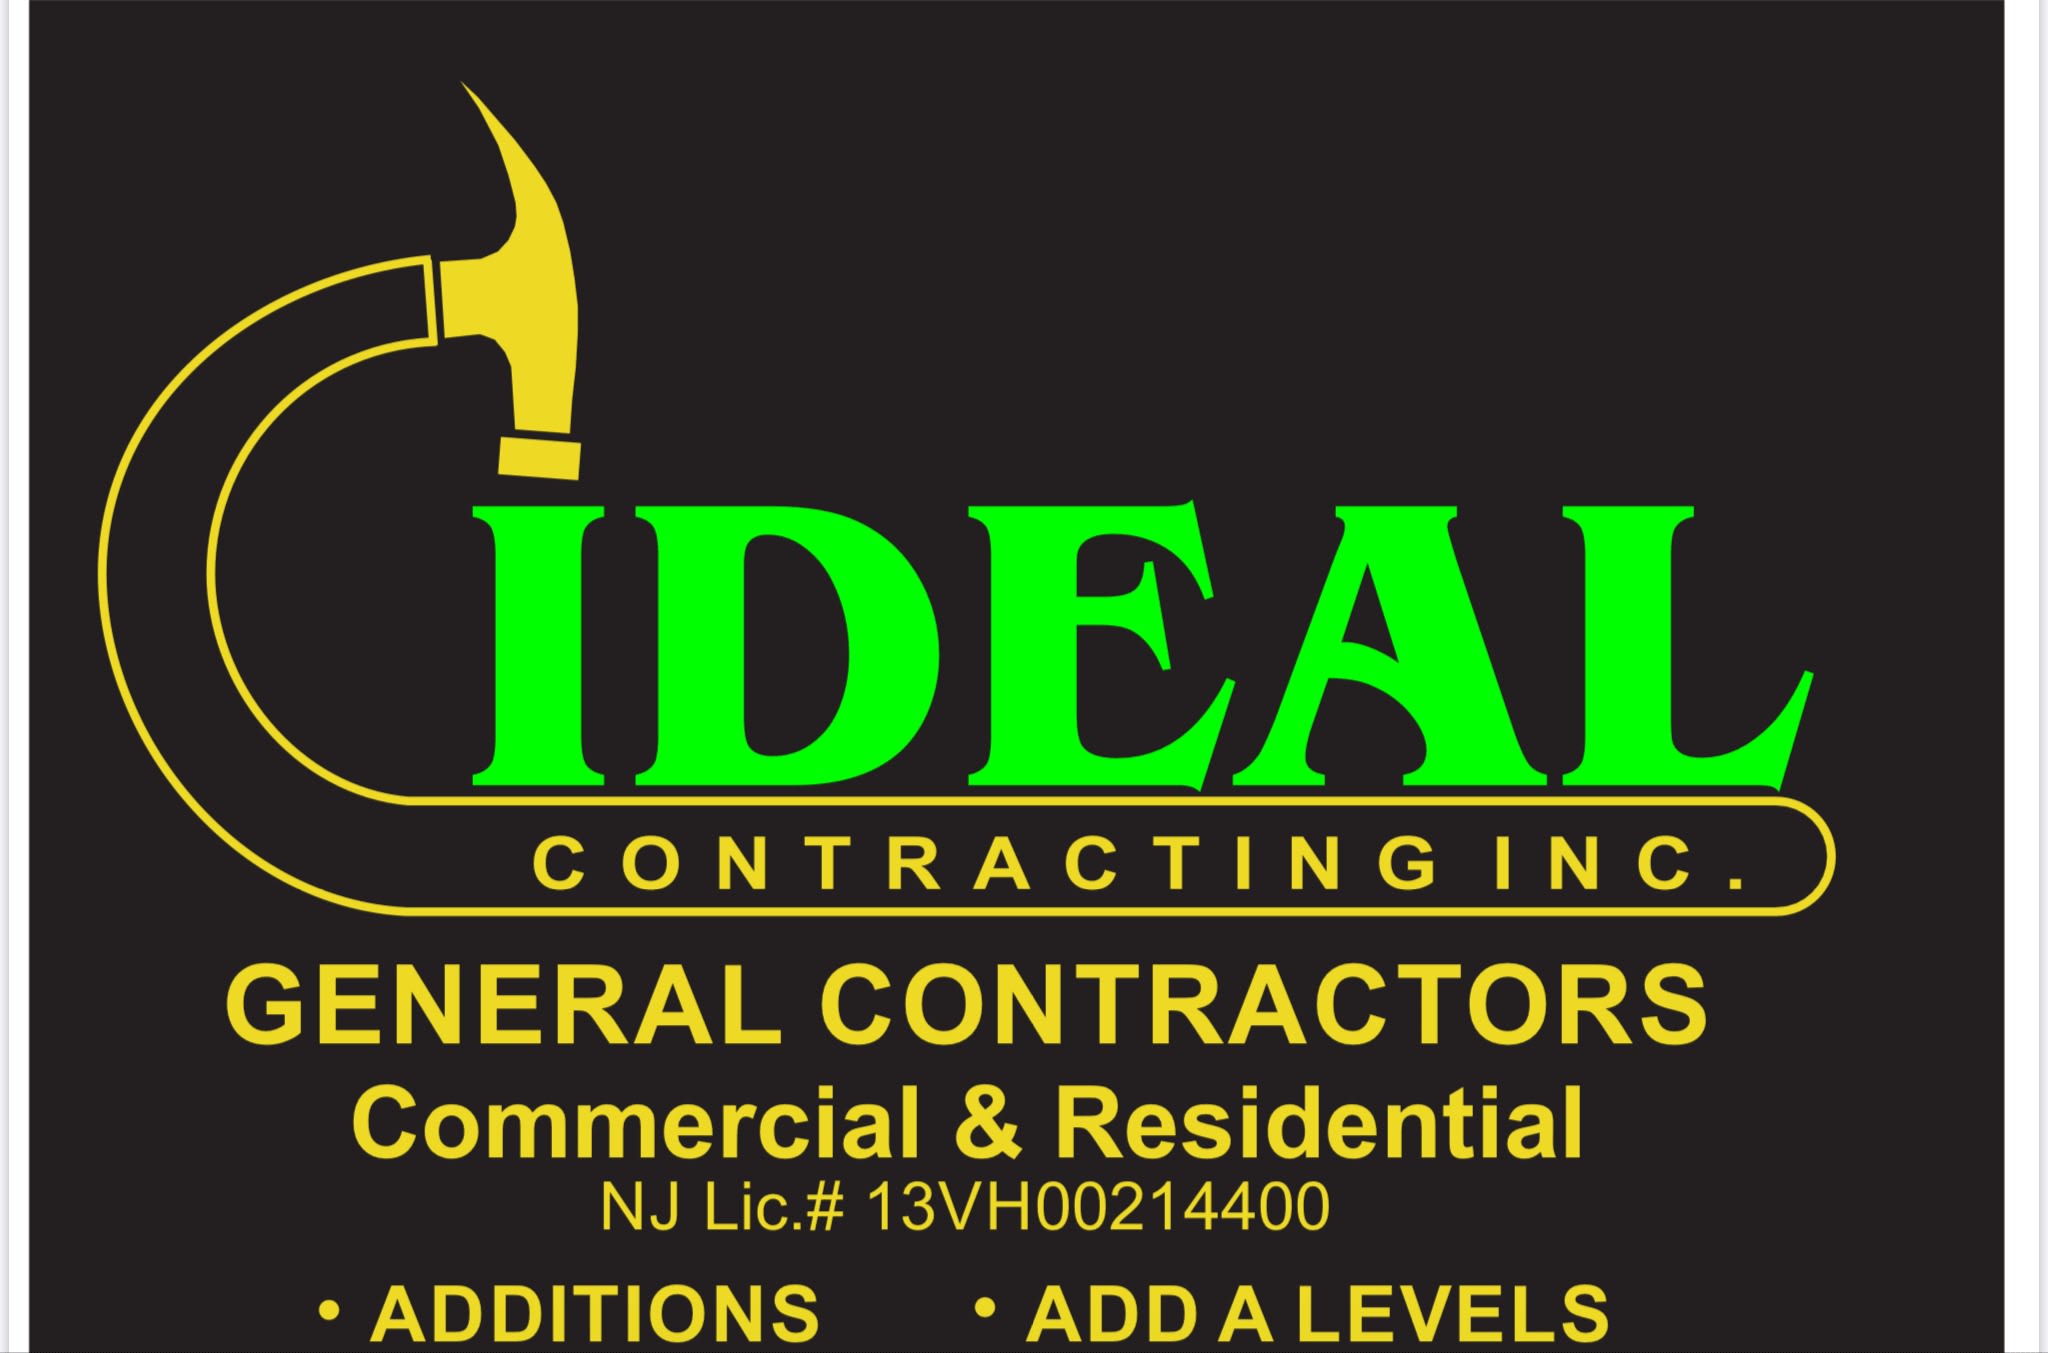 Ideal Contracting Inc.